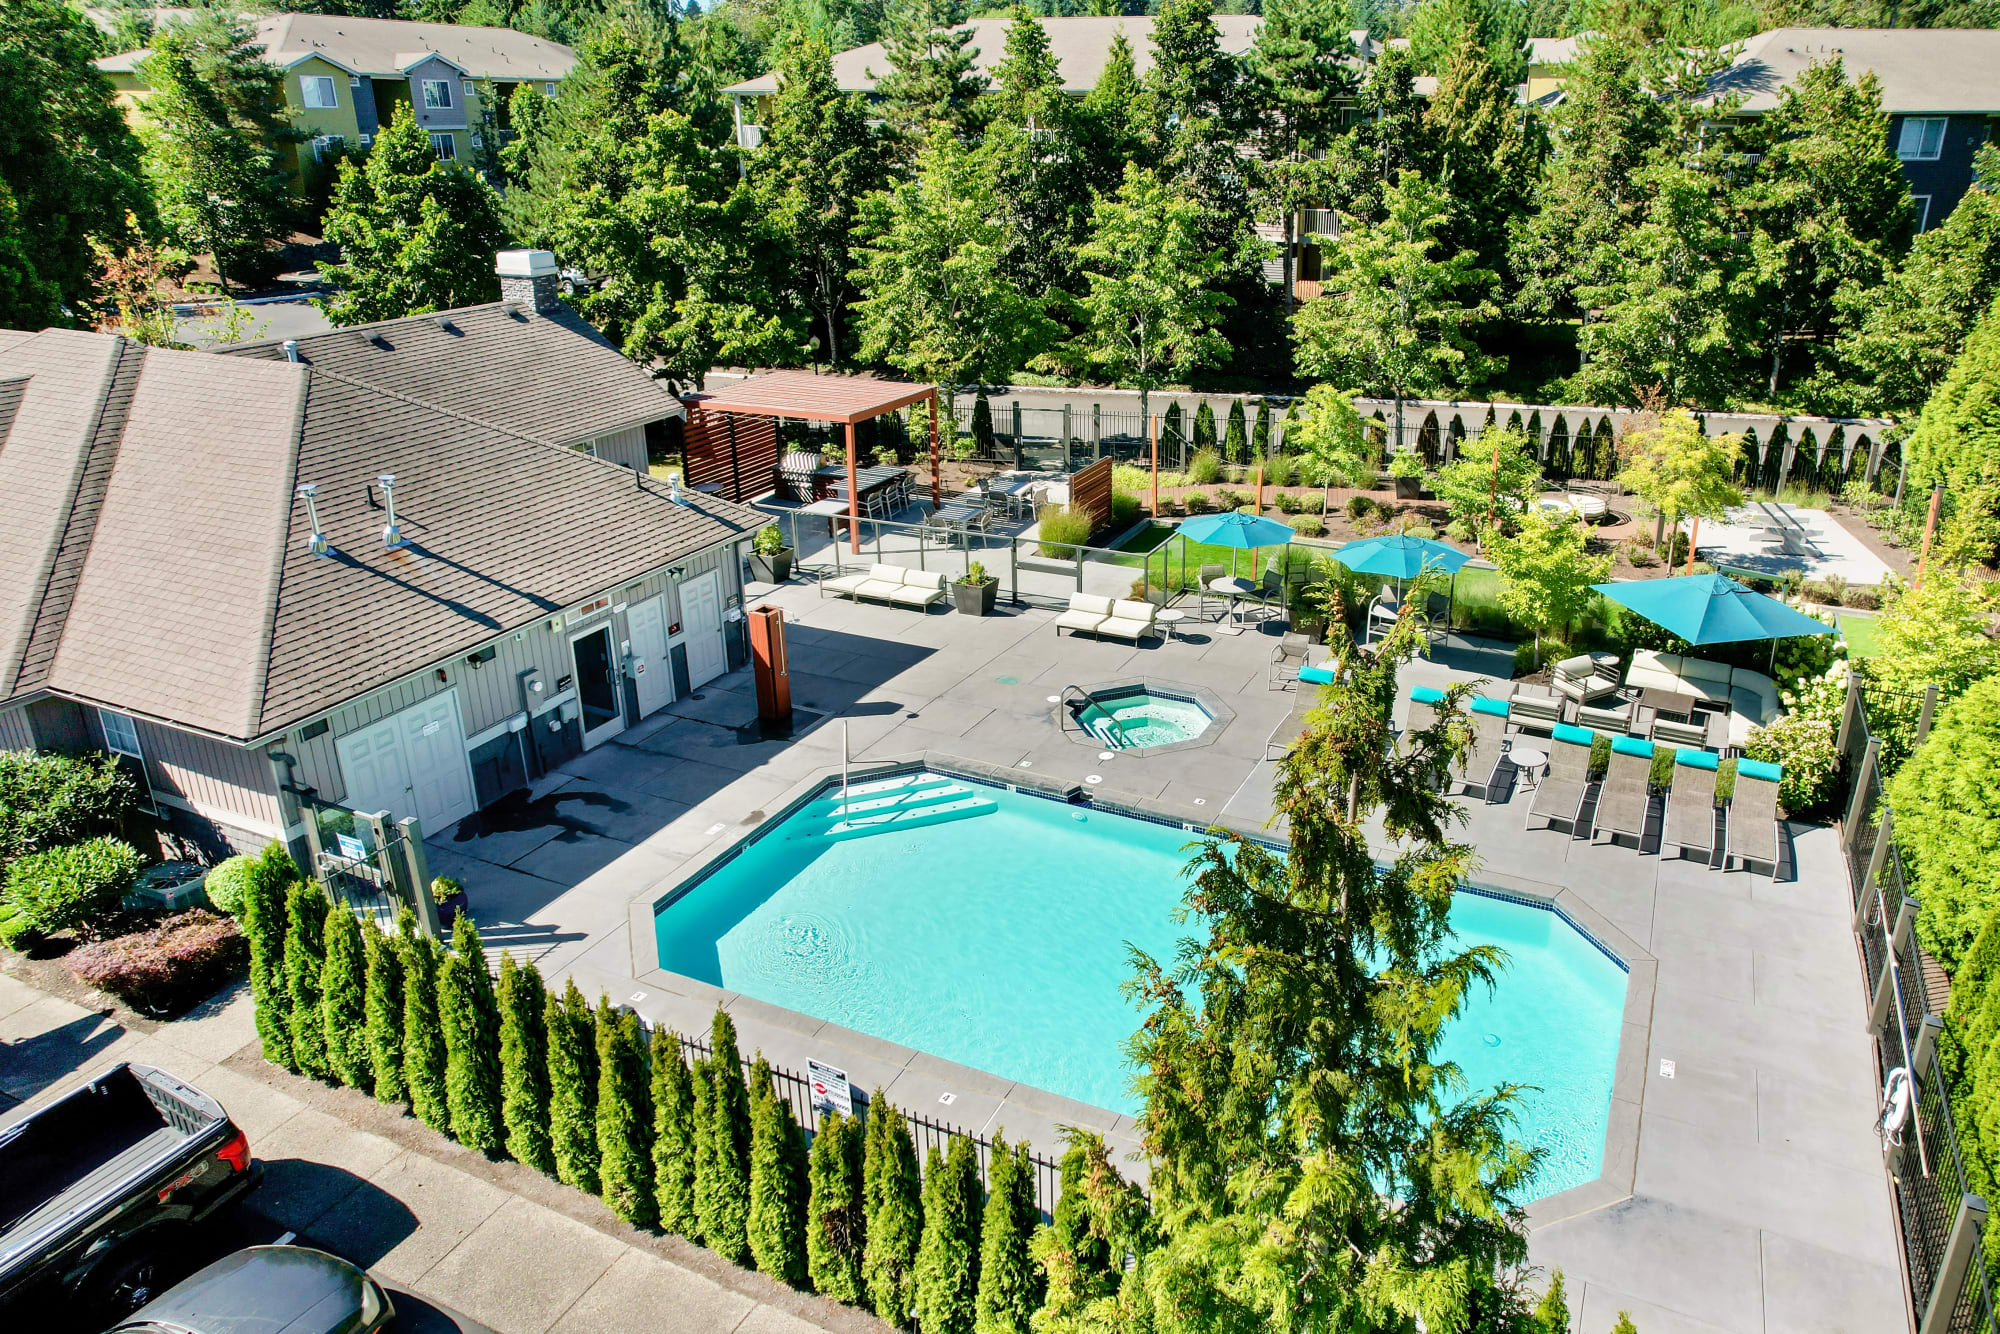 Pool, Spa and Outdoor Lounge and Rec Area at Brookside Village in Auburn, Washington